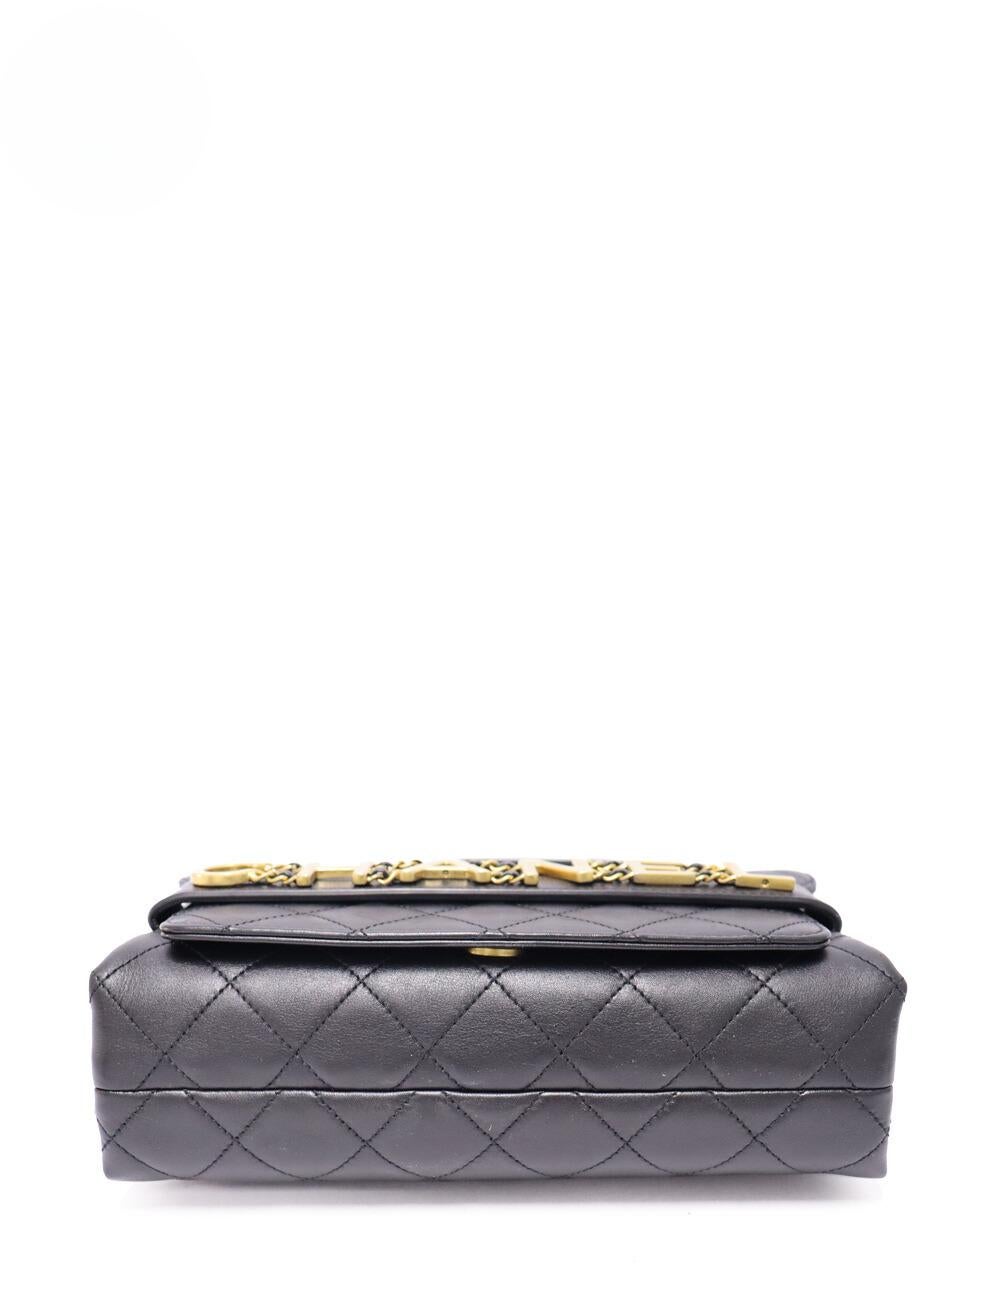 Chanel Calfskin Quilted Enchained Flap Bag For Sale 1